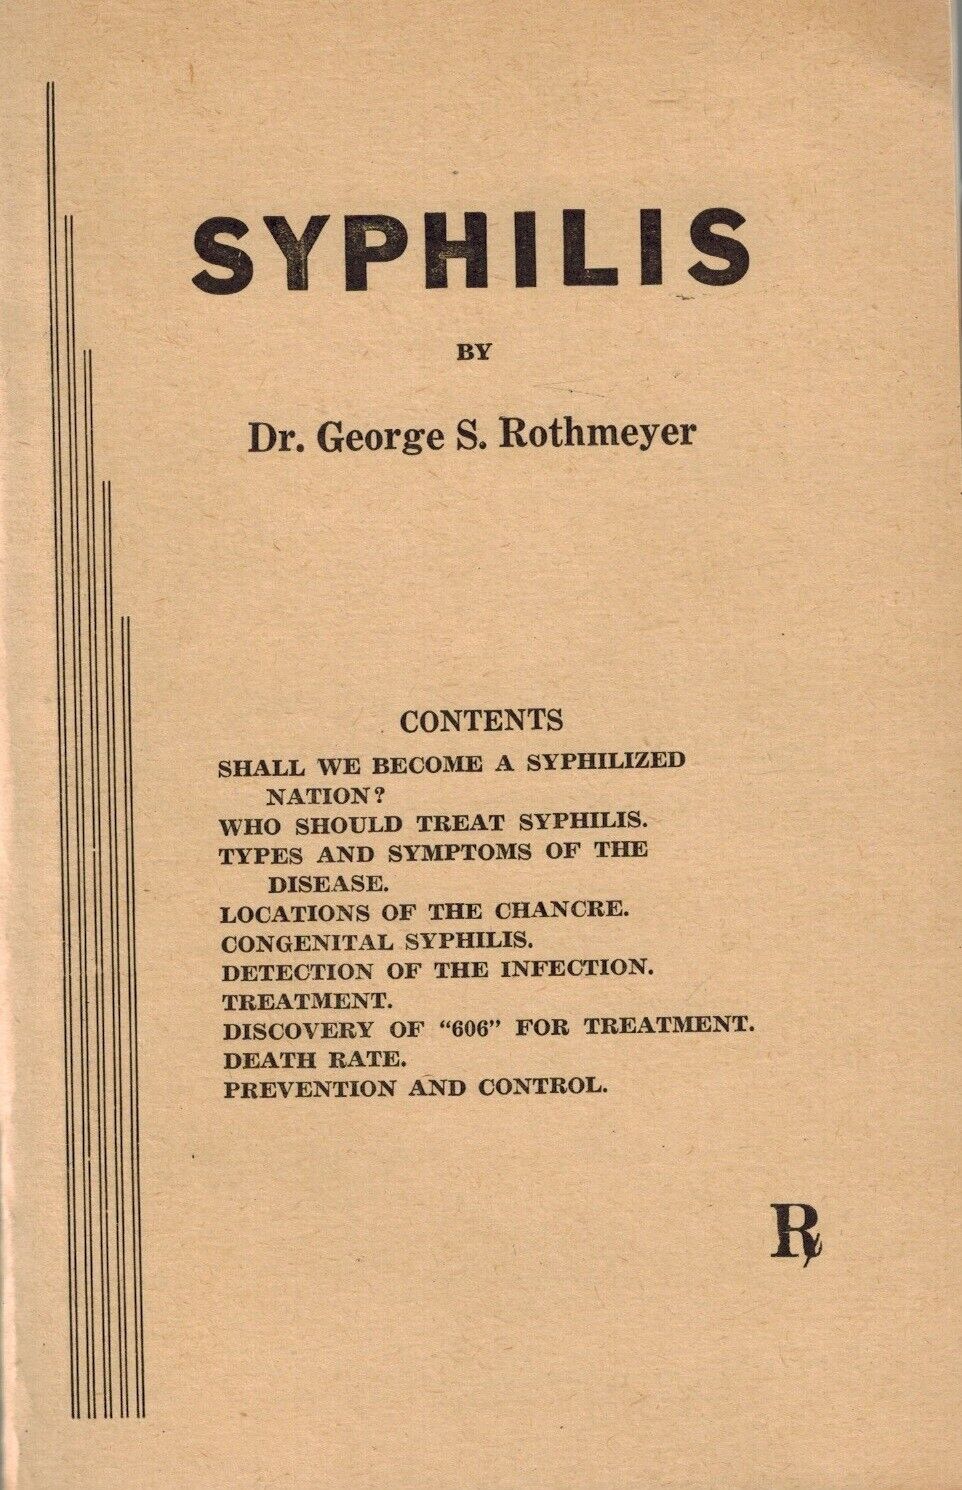 1939 Syphilis - Treatment, Congenital, Prevention, Sexually Transmitted Diseases